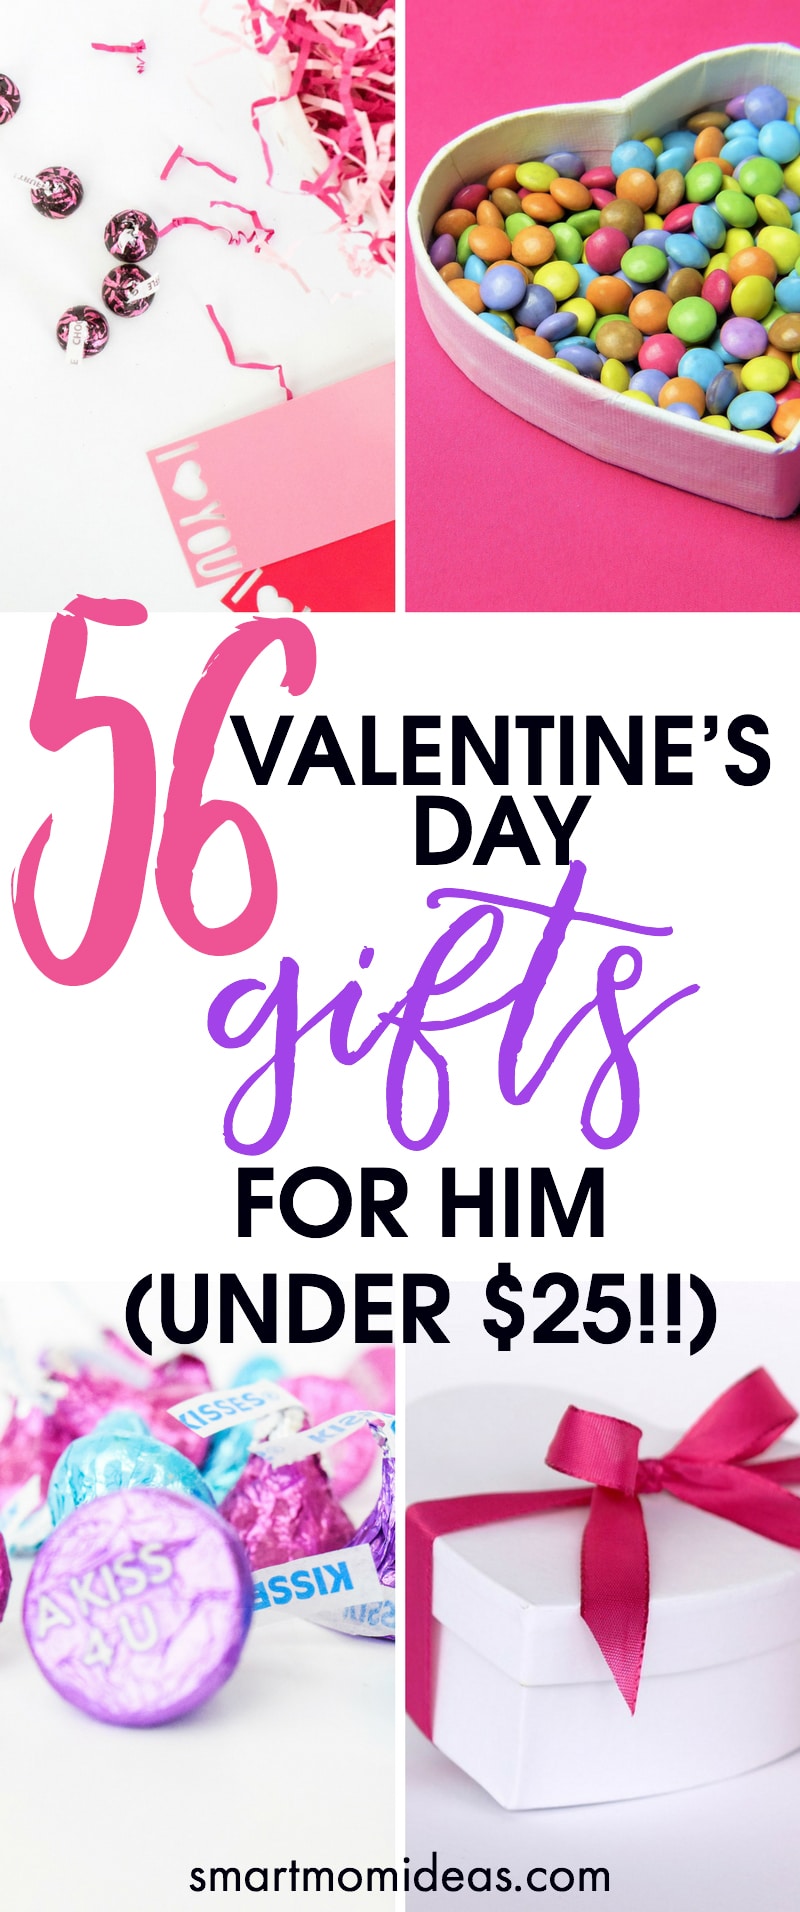 Valentine's Day Gift Ideas for Him - Andee Layne